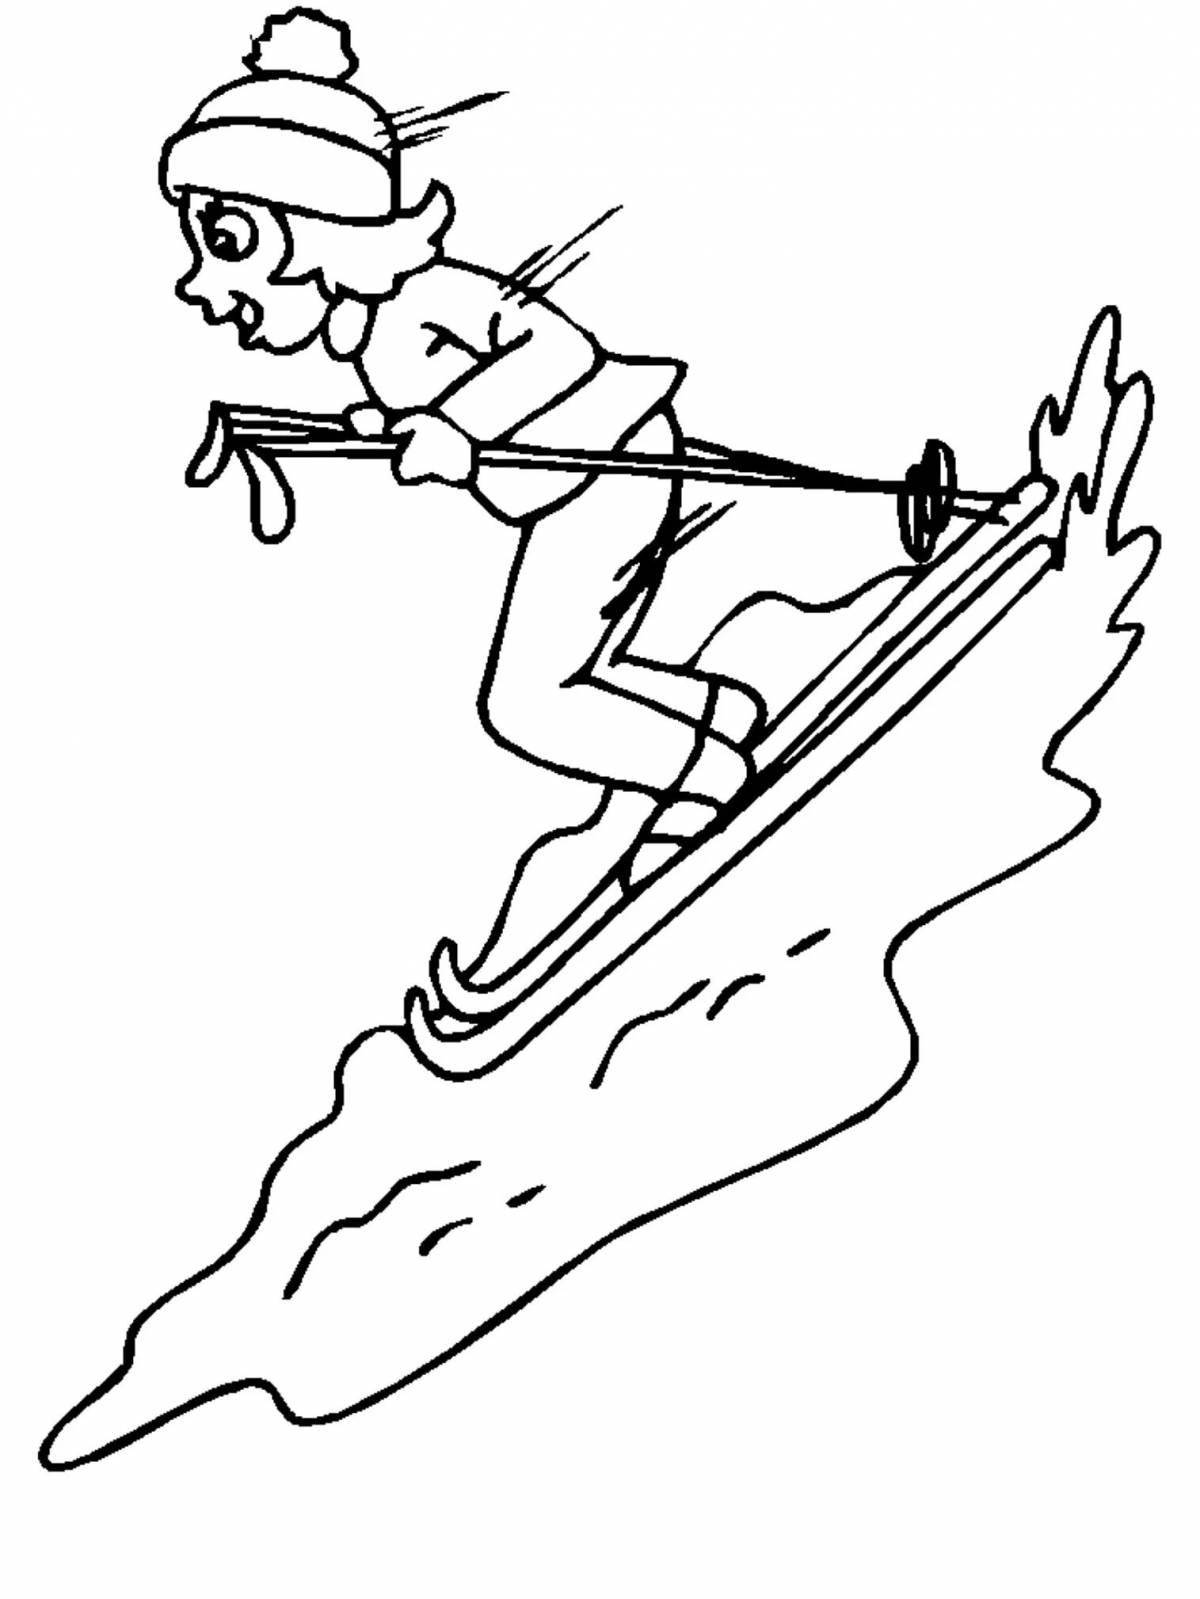 Stylish skier coloring page